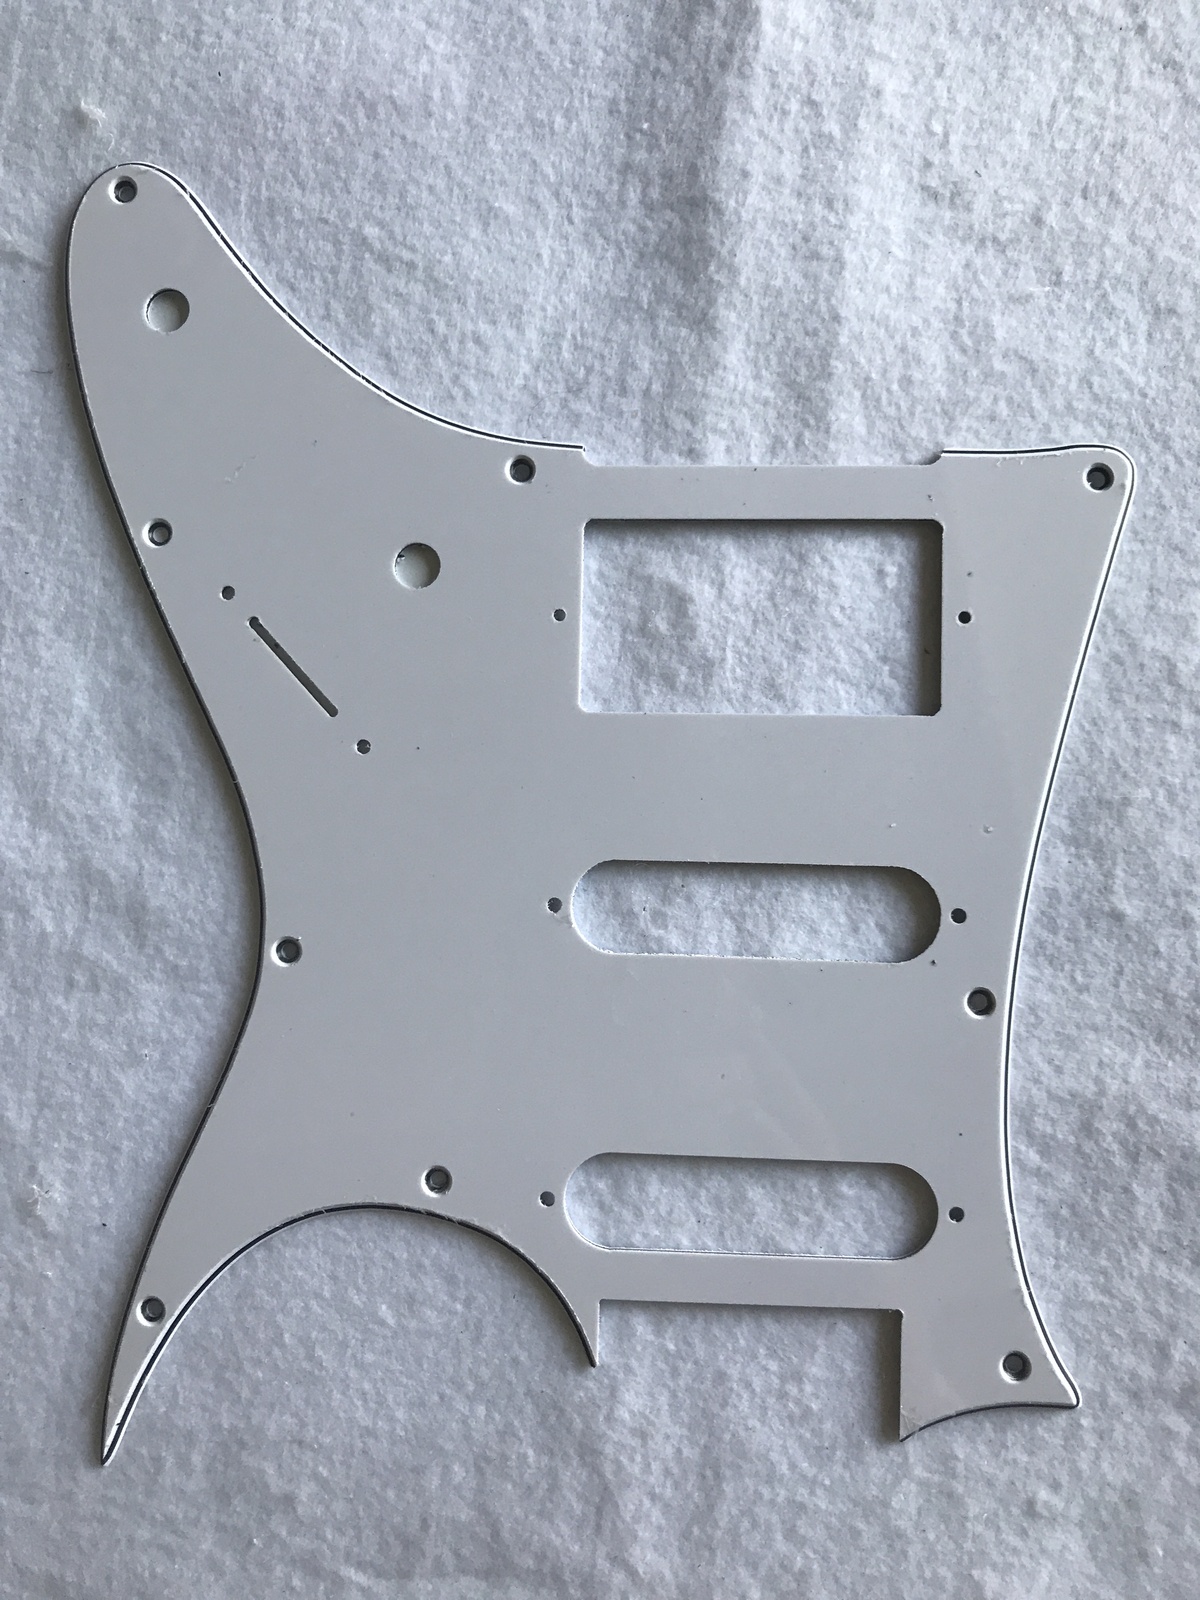 For Ibanez RG40 HSS Style Guitar Pickguard Scratch Plate,3 Ply White - $9.00